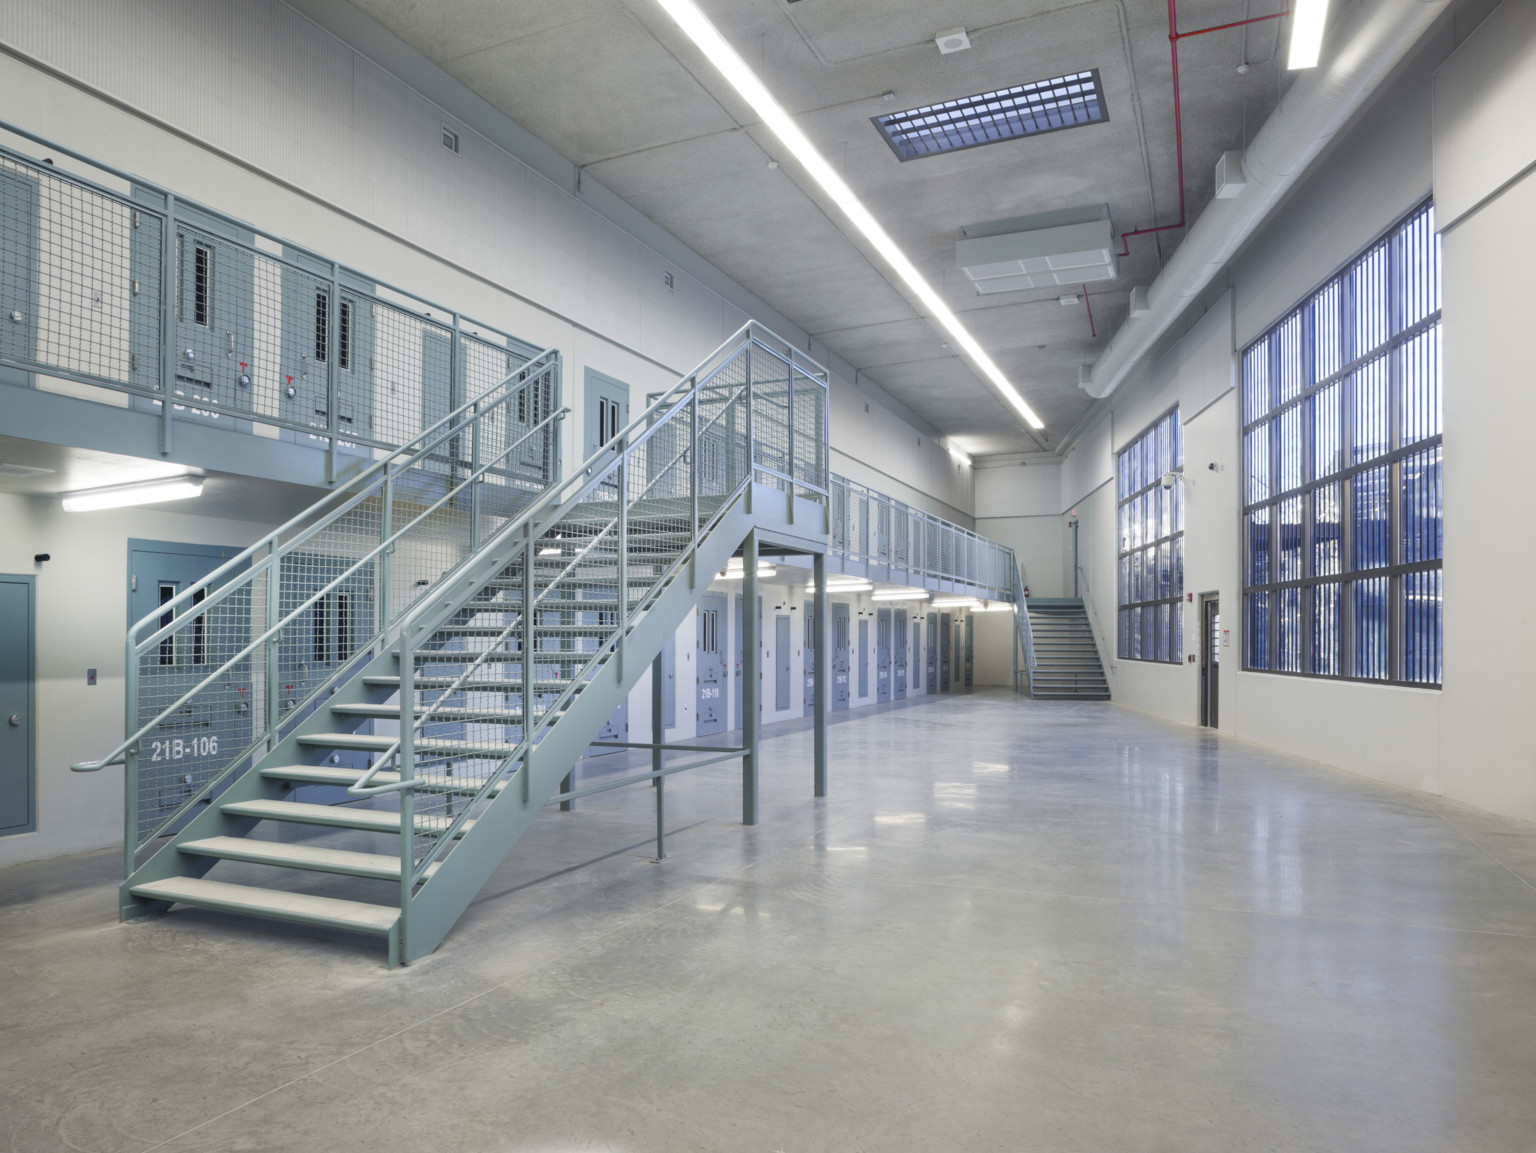 Two floors of cells with grey doors open into central area with large barred windows